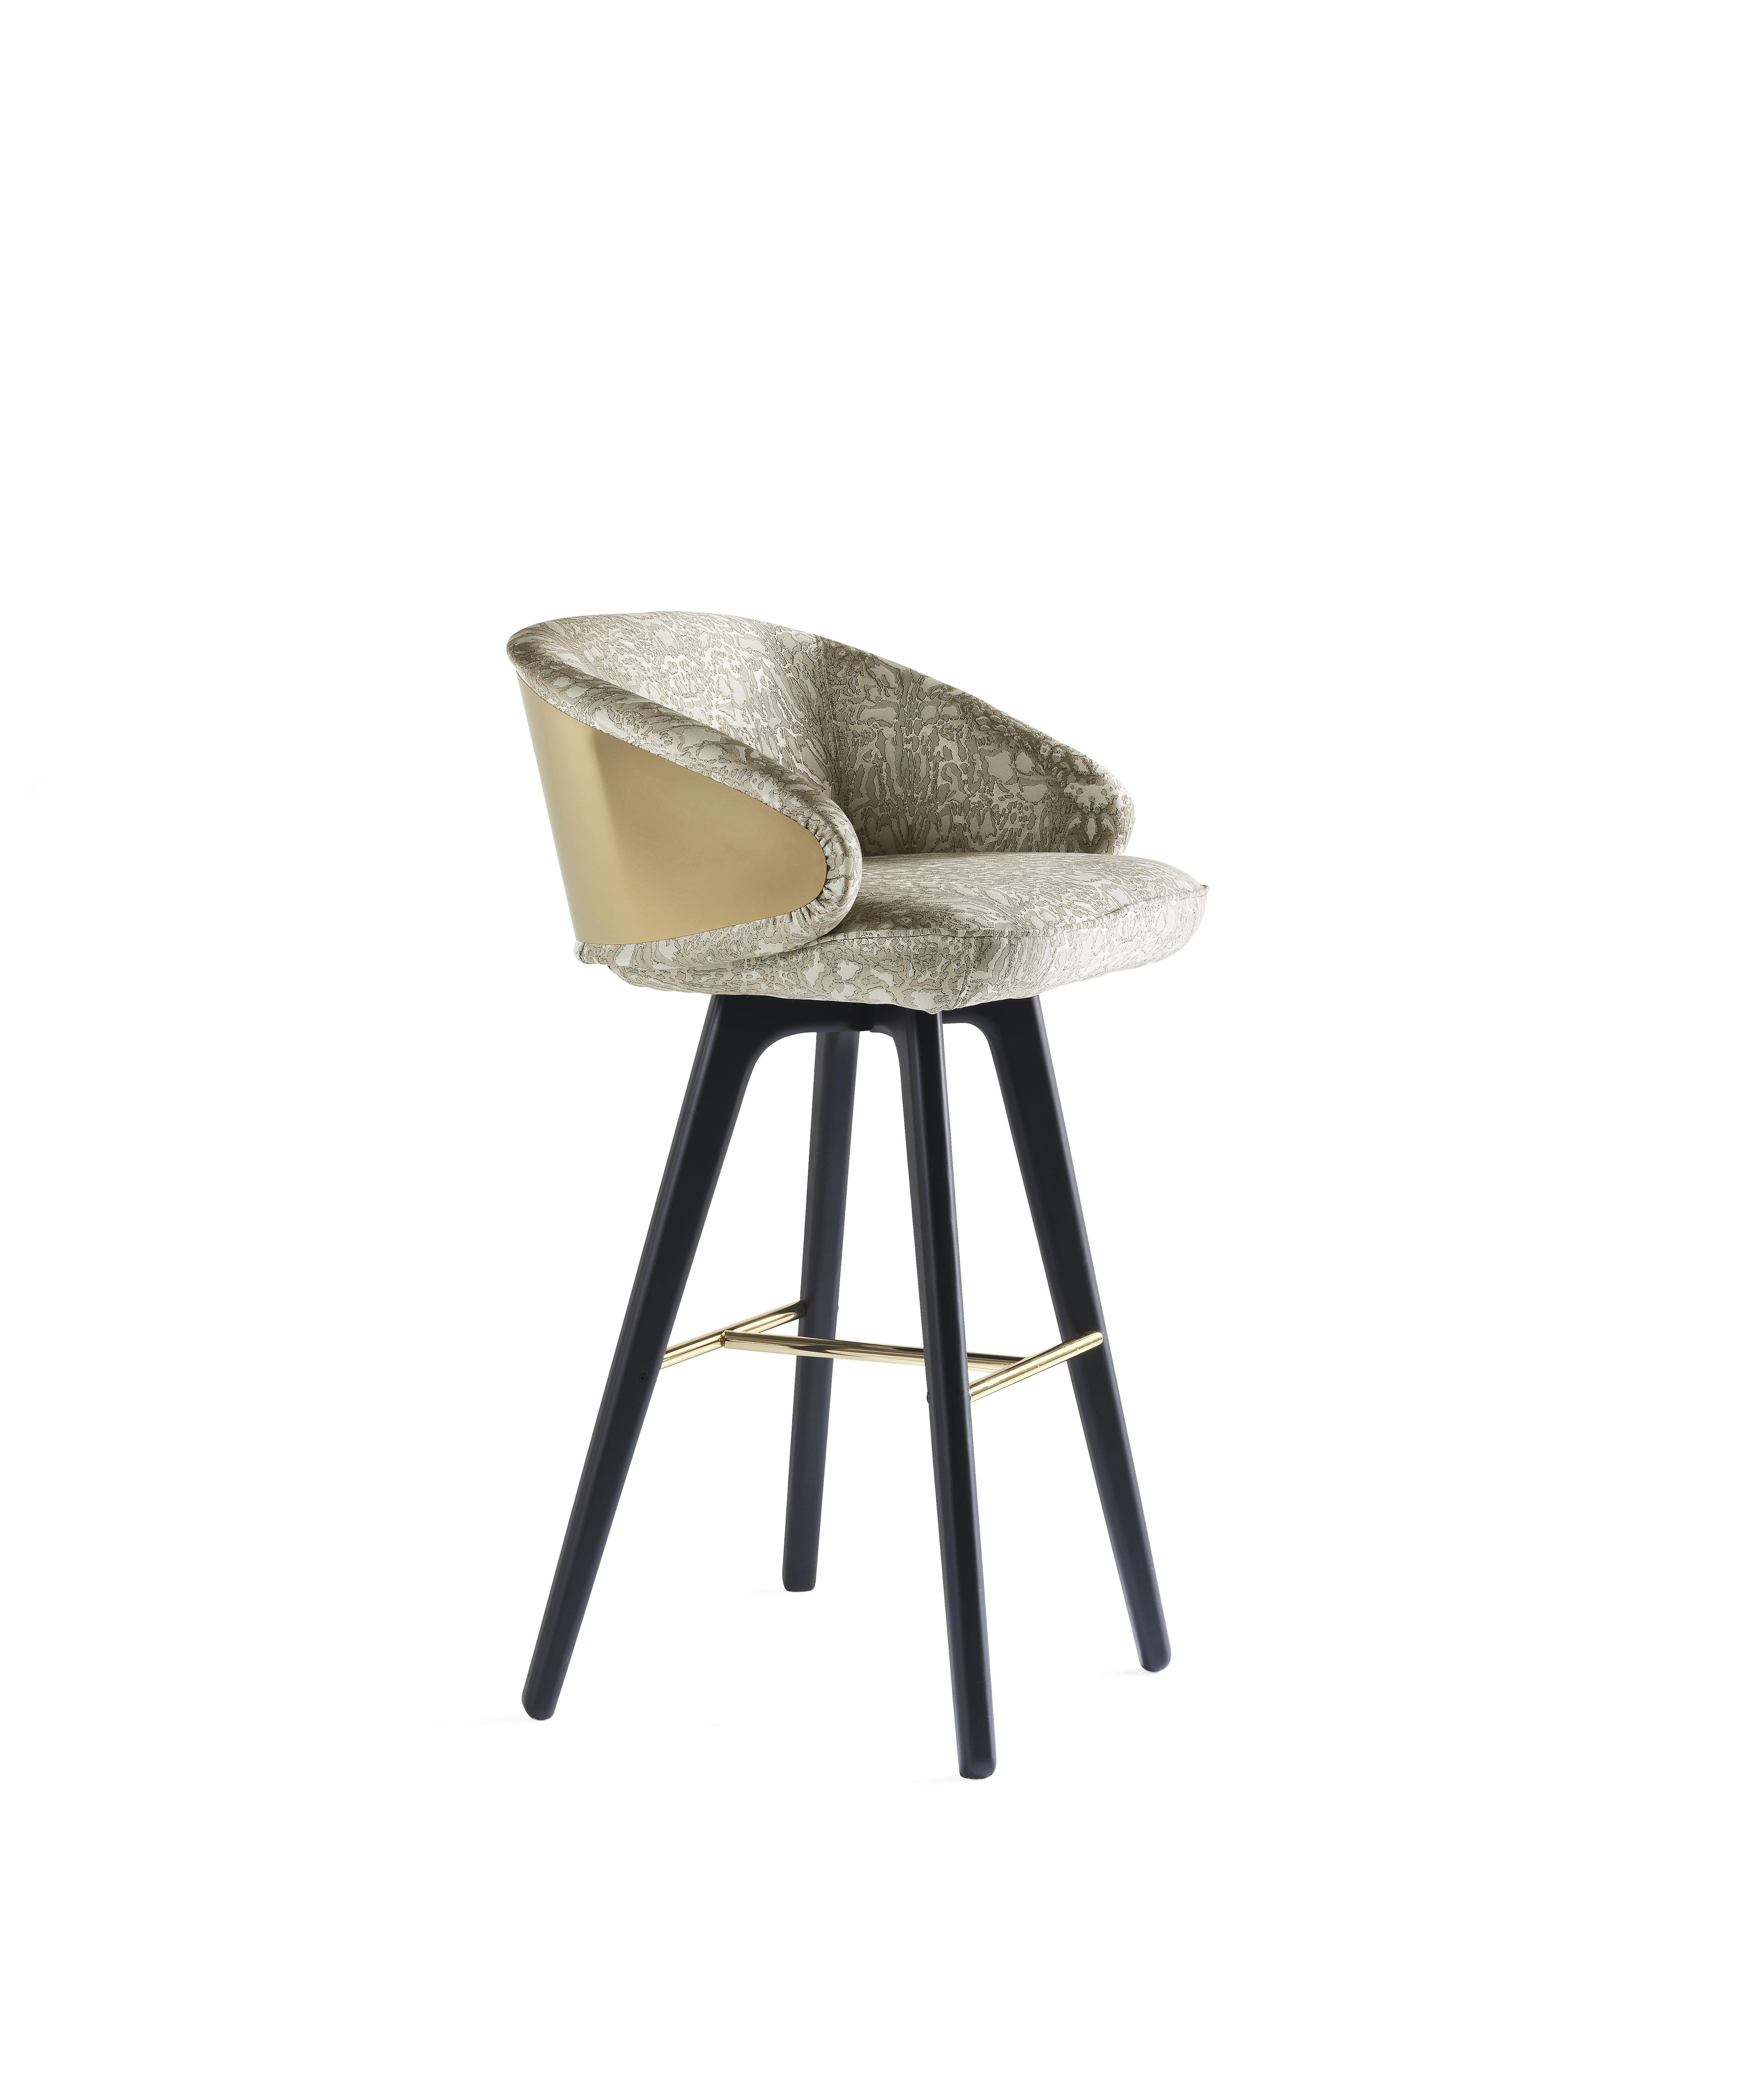 Key West Bar stool with structure in multi-layer wood and foam. Upholstery in fabric cat. A Jacquard Deni Col. B1. Wooden legs in black matt lacquered finishing with footrest in gold finishing. Metal back in gold finishing.